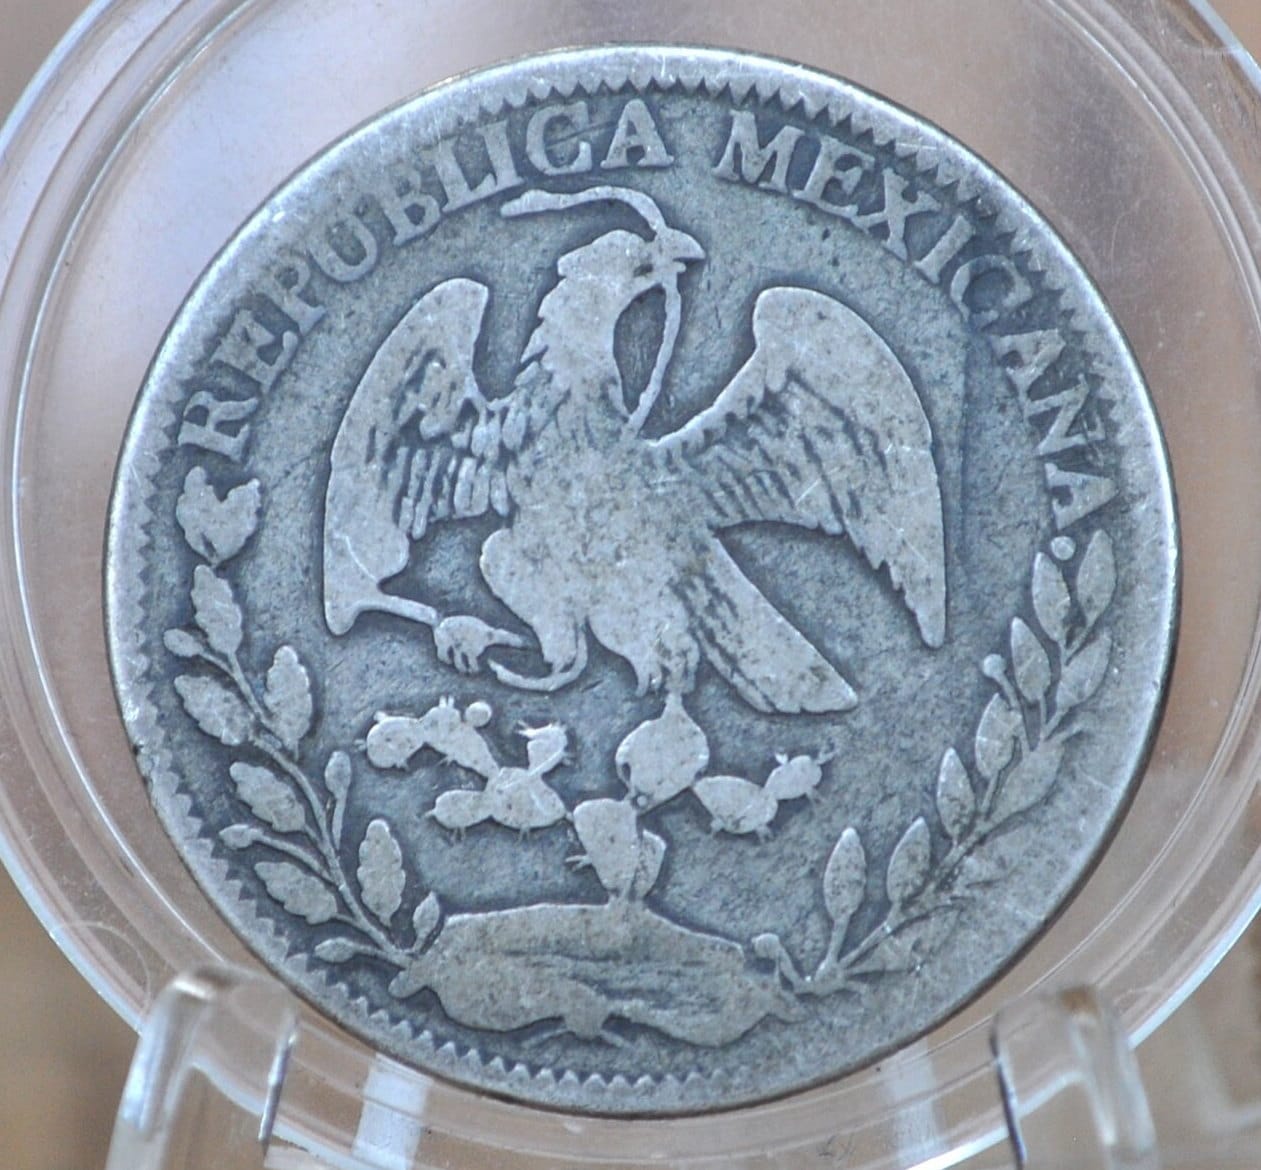 1867 Silver 4 Reales Mexico - Weak Date but Readable - Mexican Four Reales 1867 Silver Libertad Mexico First Republic